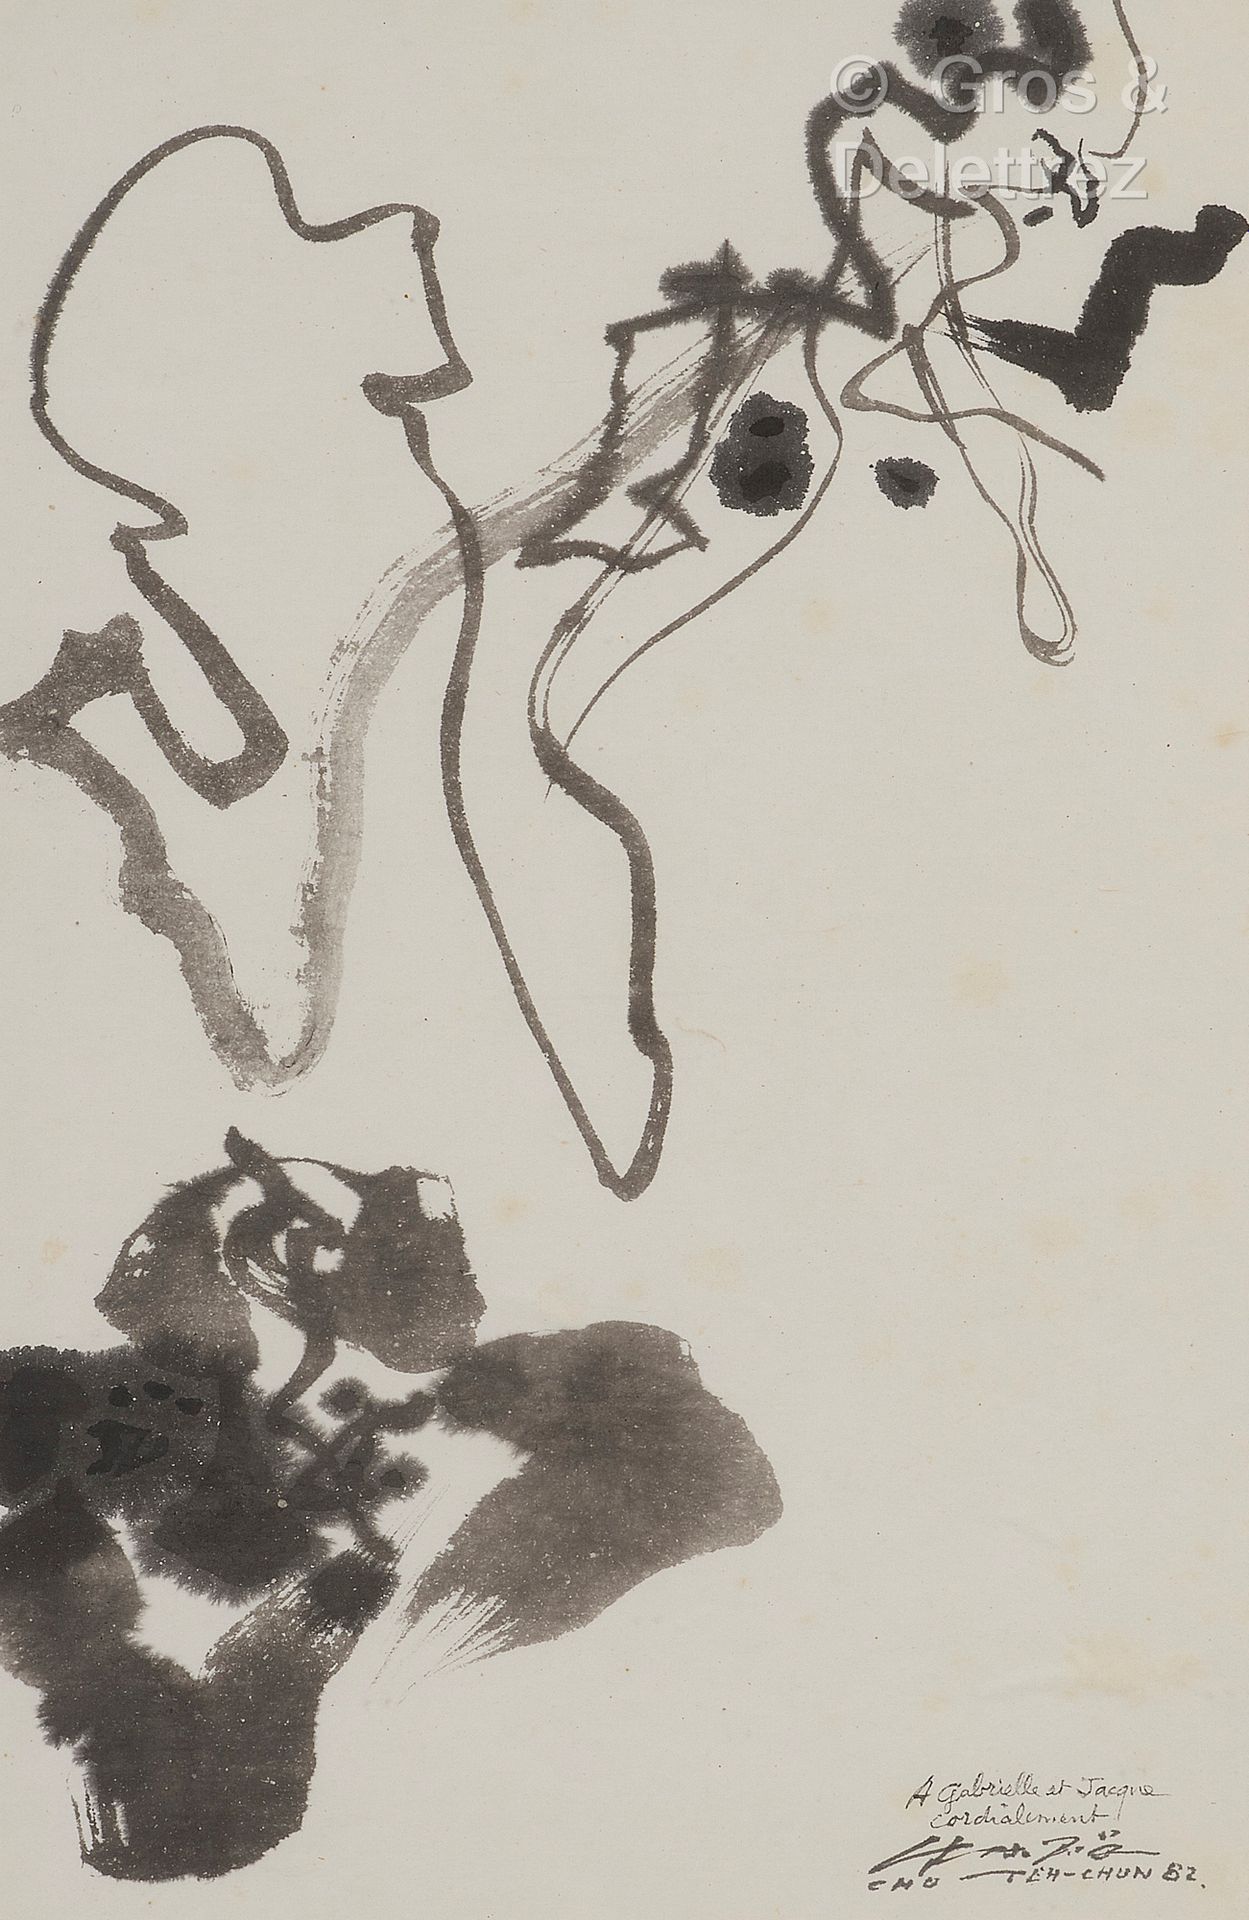 CHU Teh-Chun [FRANCE-CHINE] (1920-2014) Untitled, 1982
Brush and Indian ink on p&hellip;